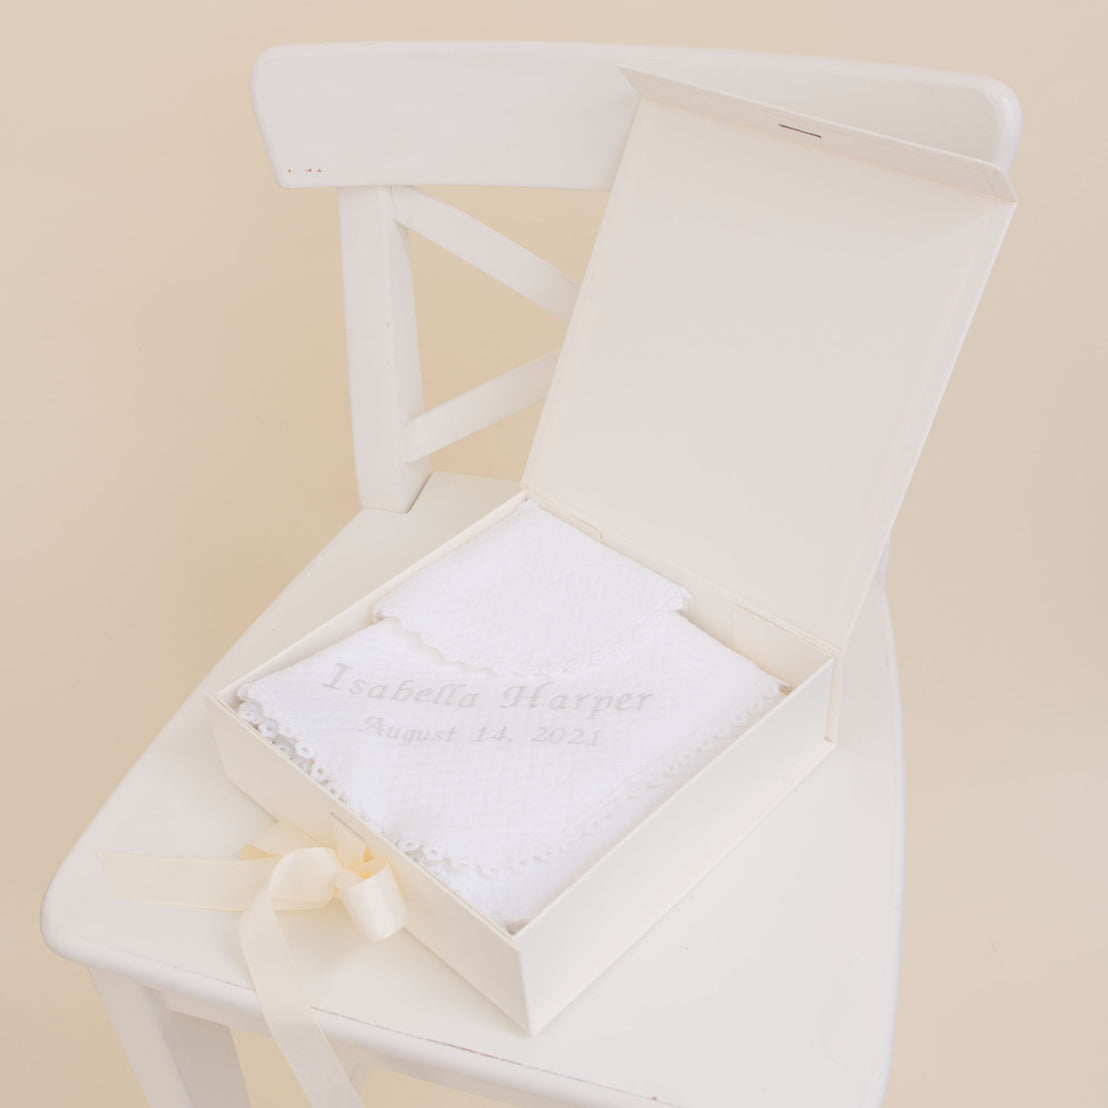 A Baby Beau & Belle Baby Girl Personalized Gift Set on a white chair, personalized with the name "Isabella Harper" and the date "August 14, 2021," decorated with a bow and lightly textured quilt